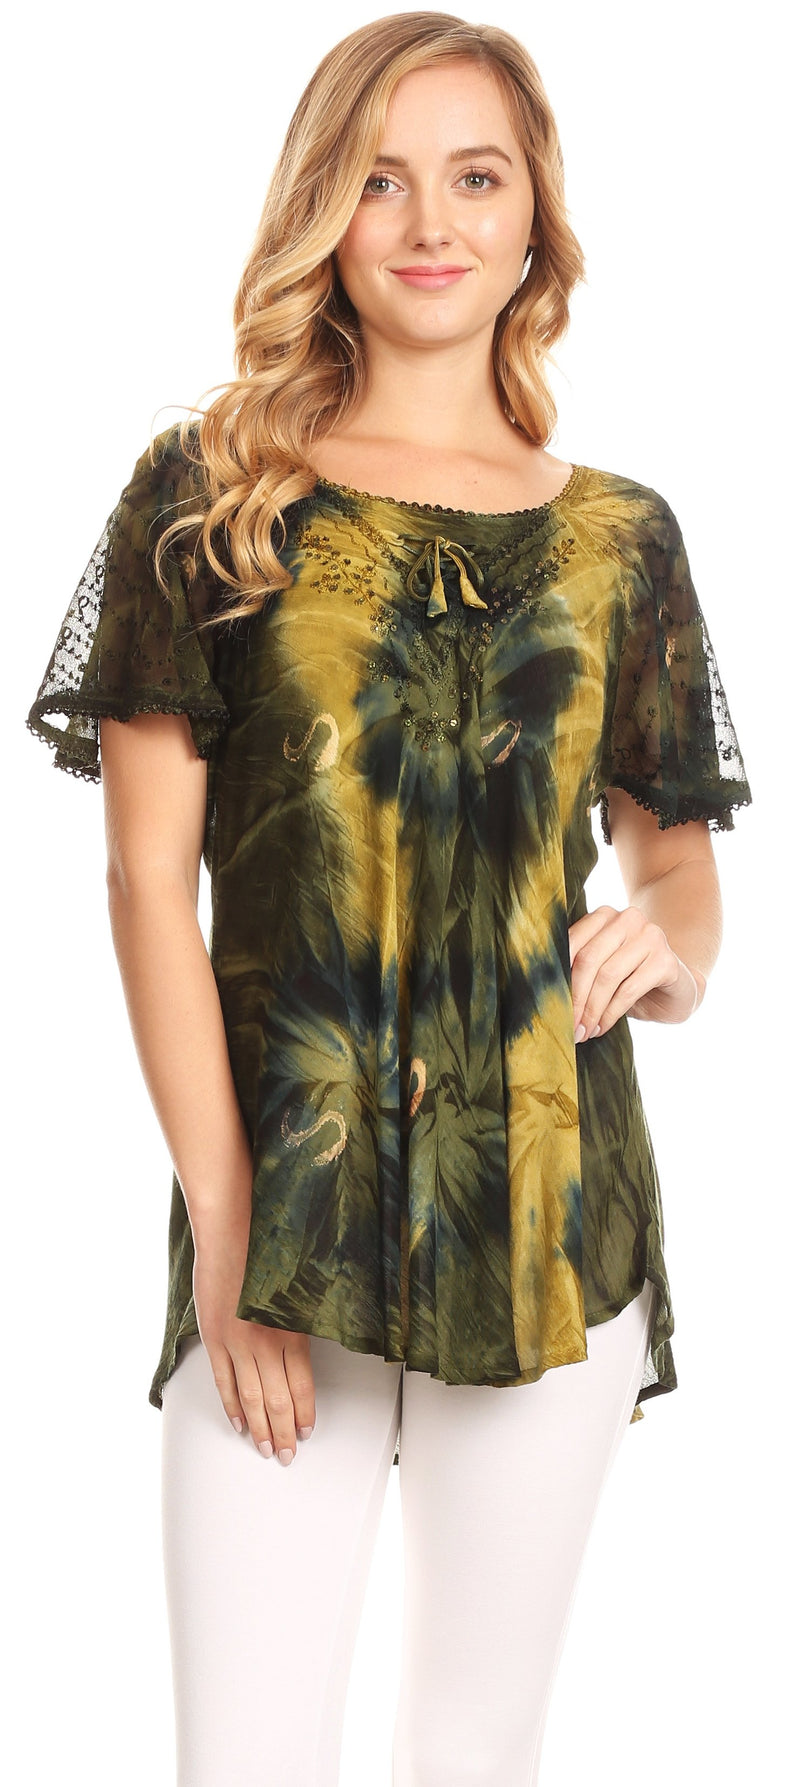 Sakkas Juniper Short Sleeve Lace Up Tie Dye Blouse with Sequins and Embroidery